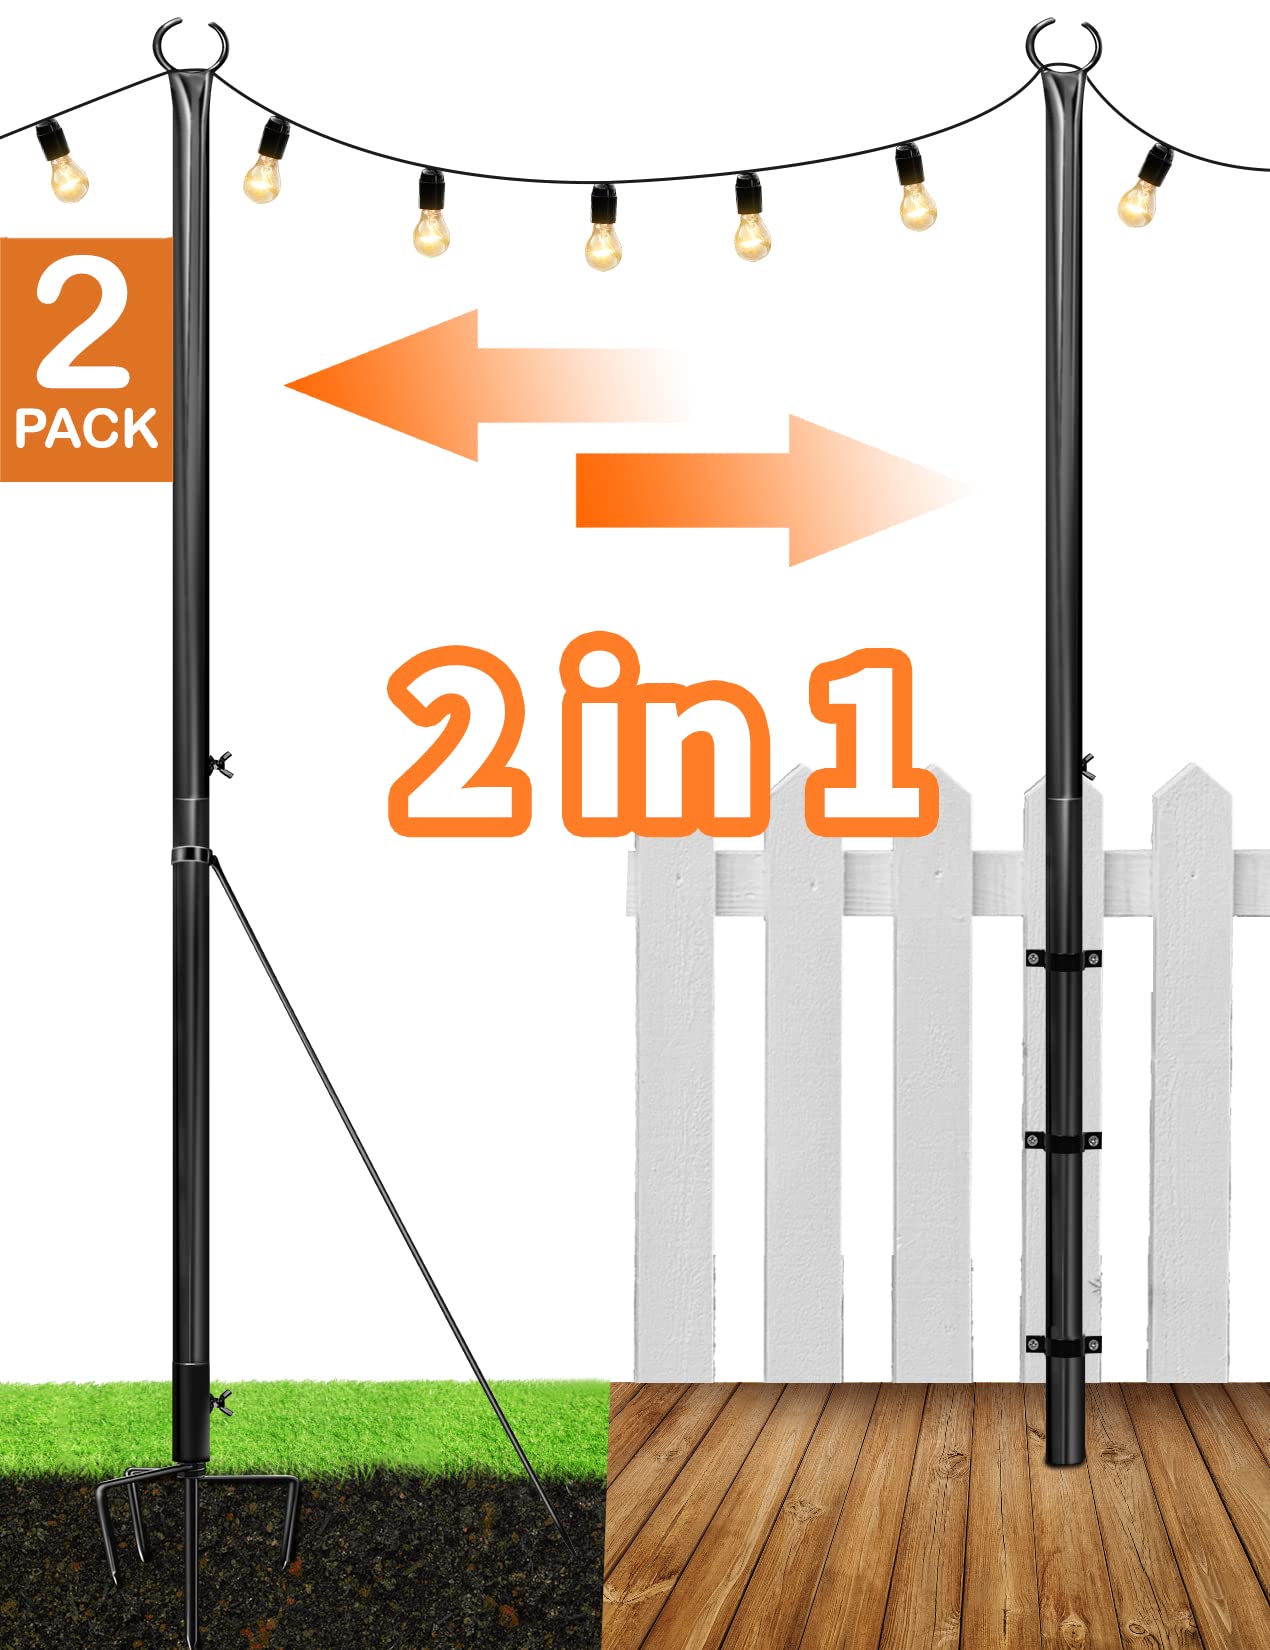 LOPANNY String Light Poles, 8.5FT Sturdy Outdoor Light Pole for Hanging String Lights, Backyard, Garden, Patio, Deck Lighting Stand for BBQ, Party, Wedding, Christmas